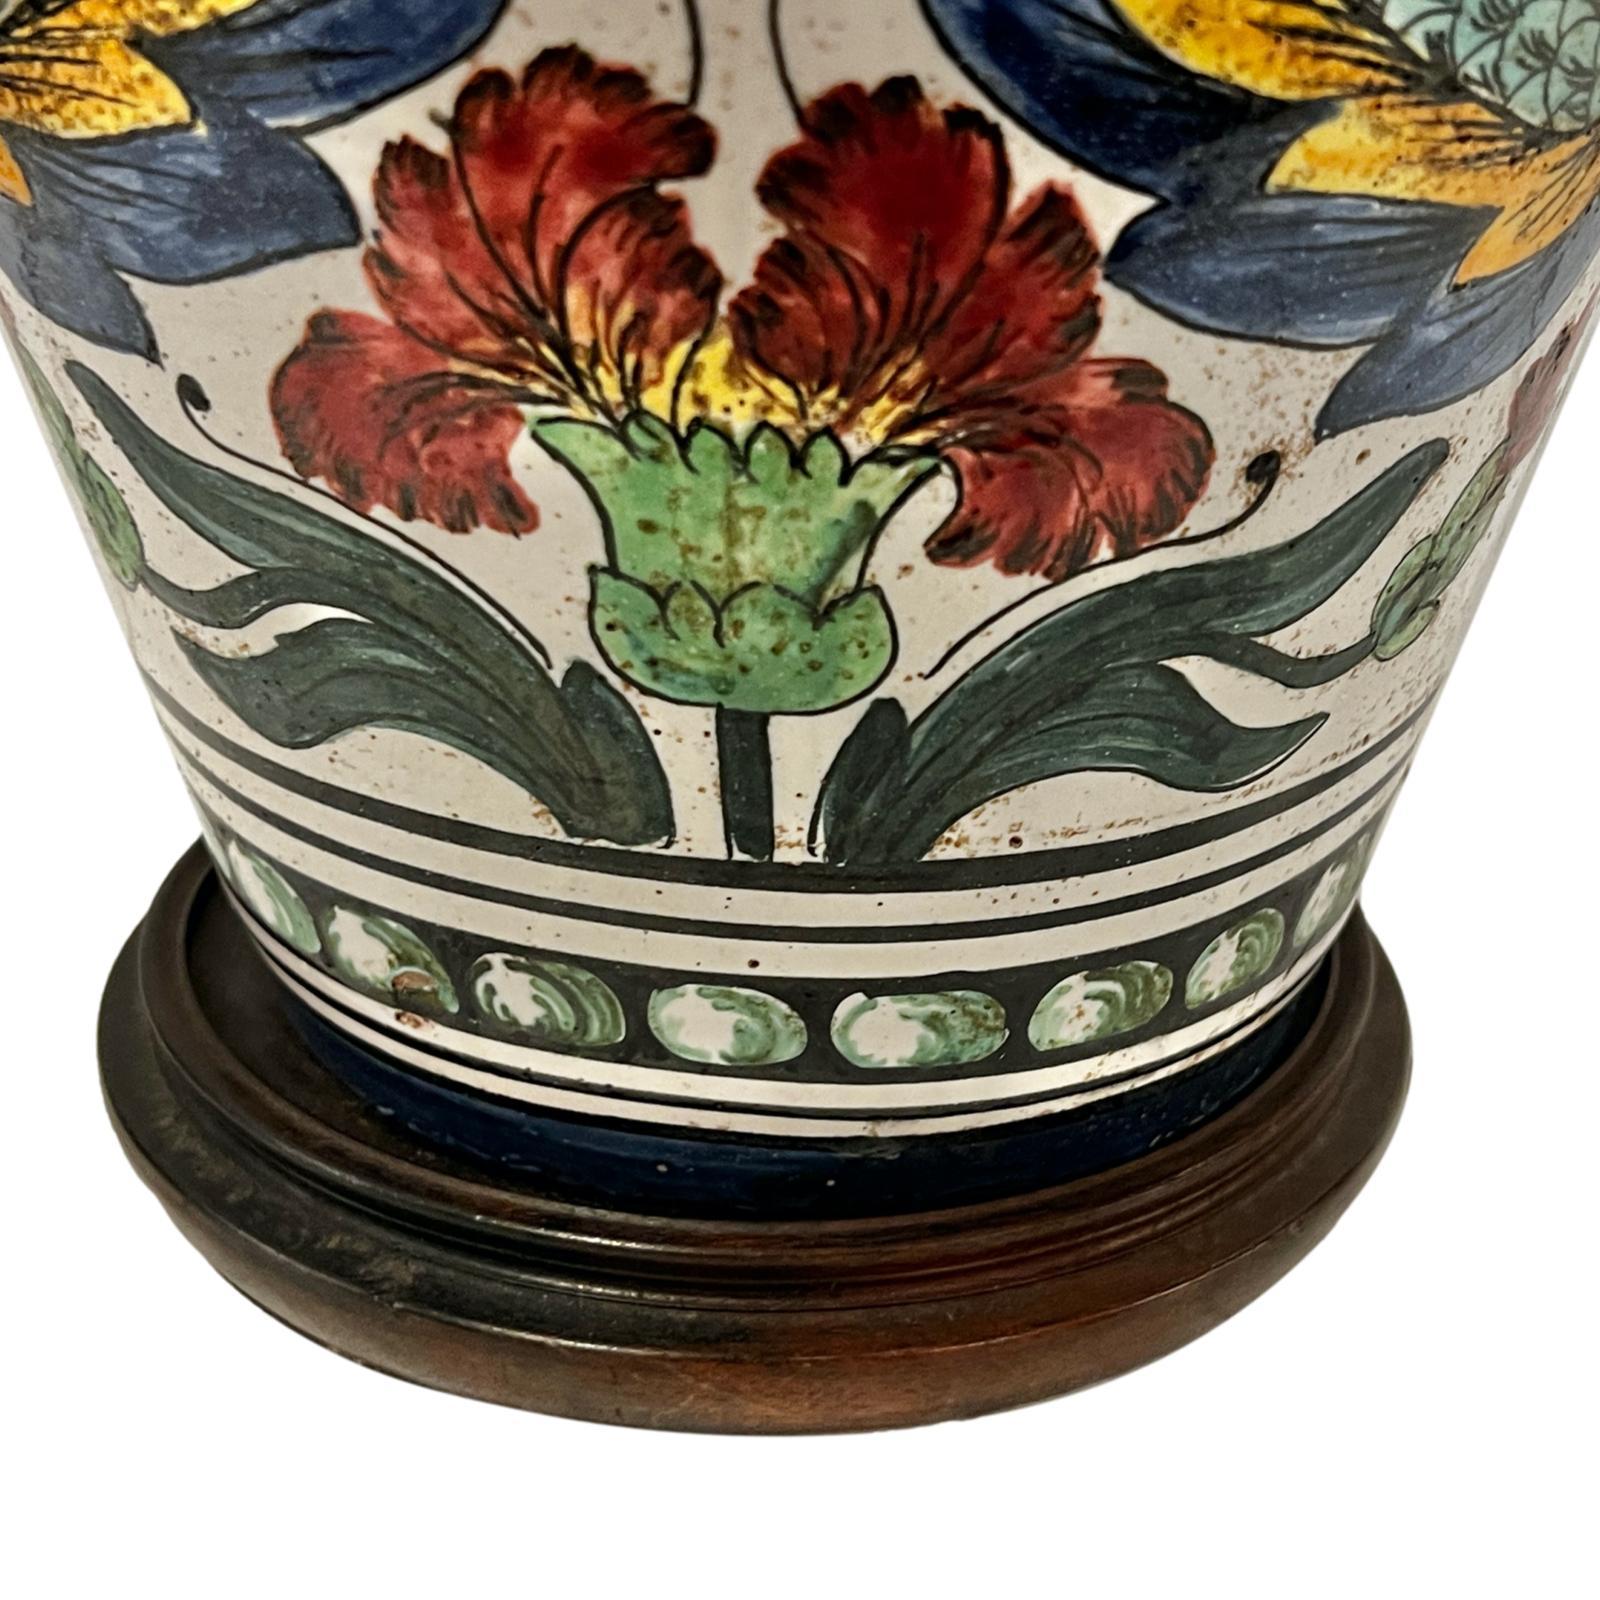 A circa 1920's Italian ceramic floral lamp with carnations and lilies.

Measurements:
height of body: 19